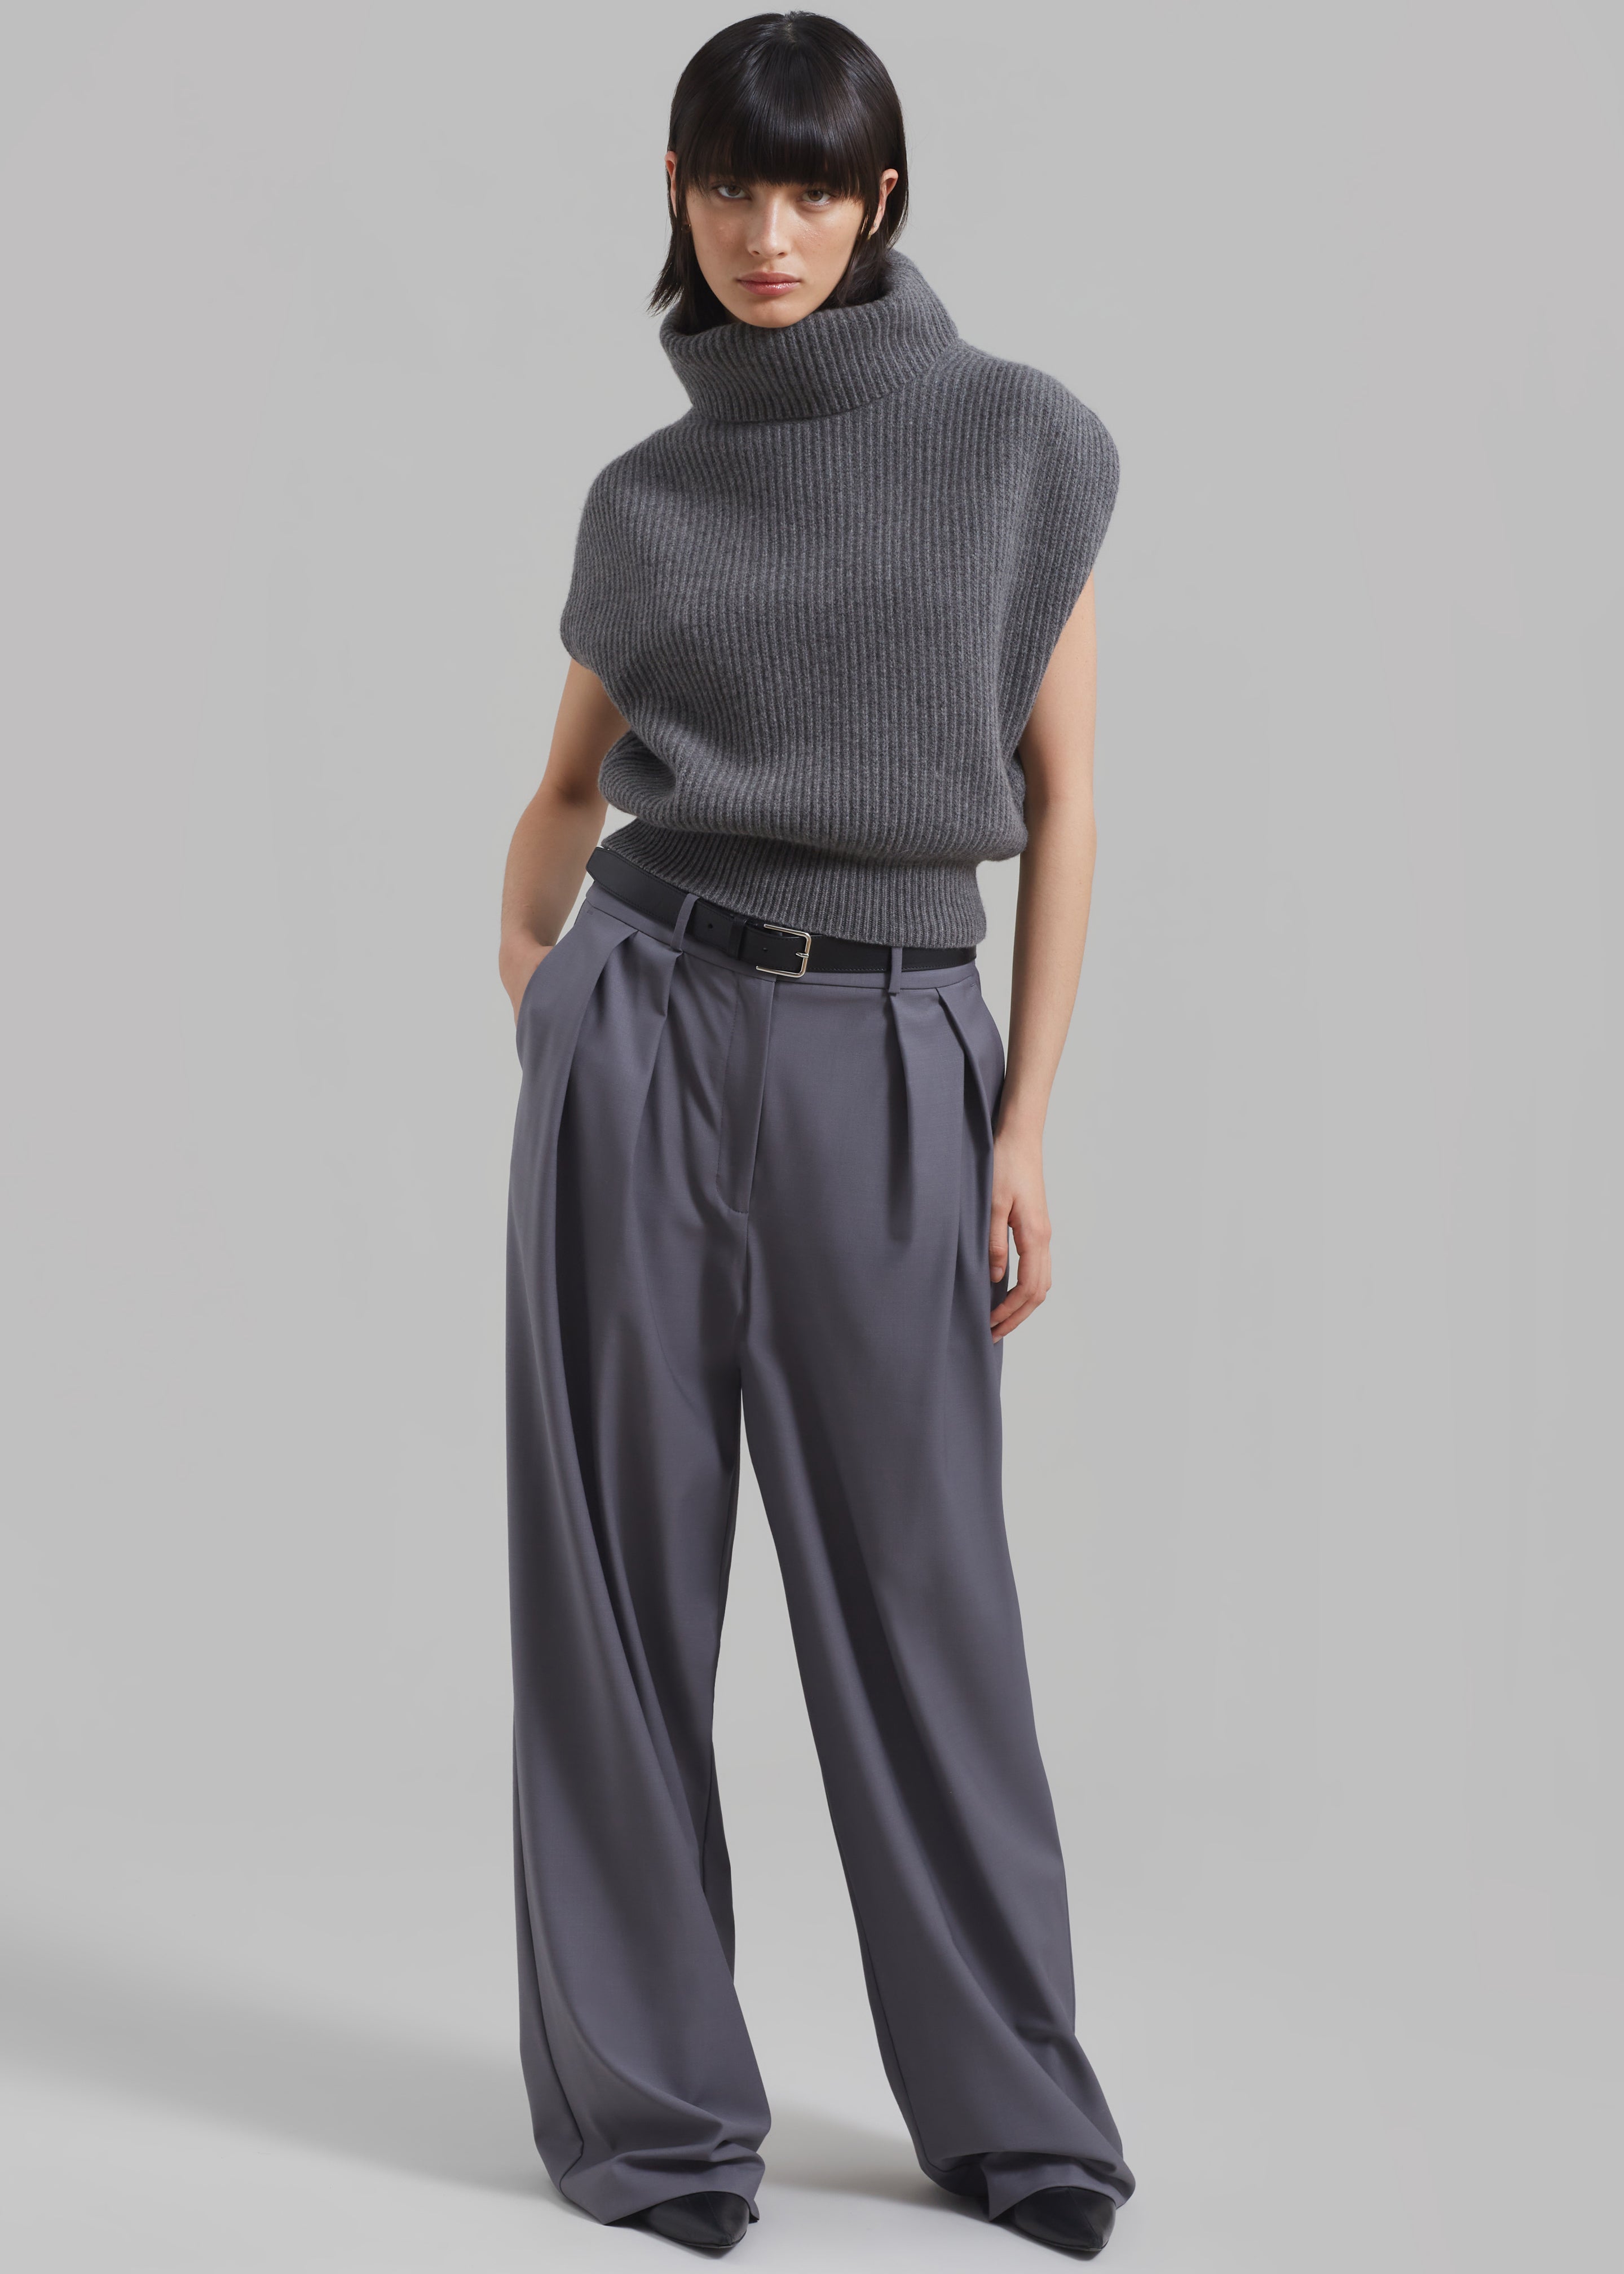 Ripley Pleated Trousers - Grey - 5